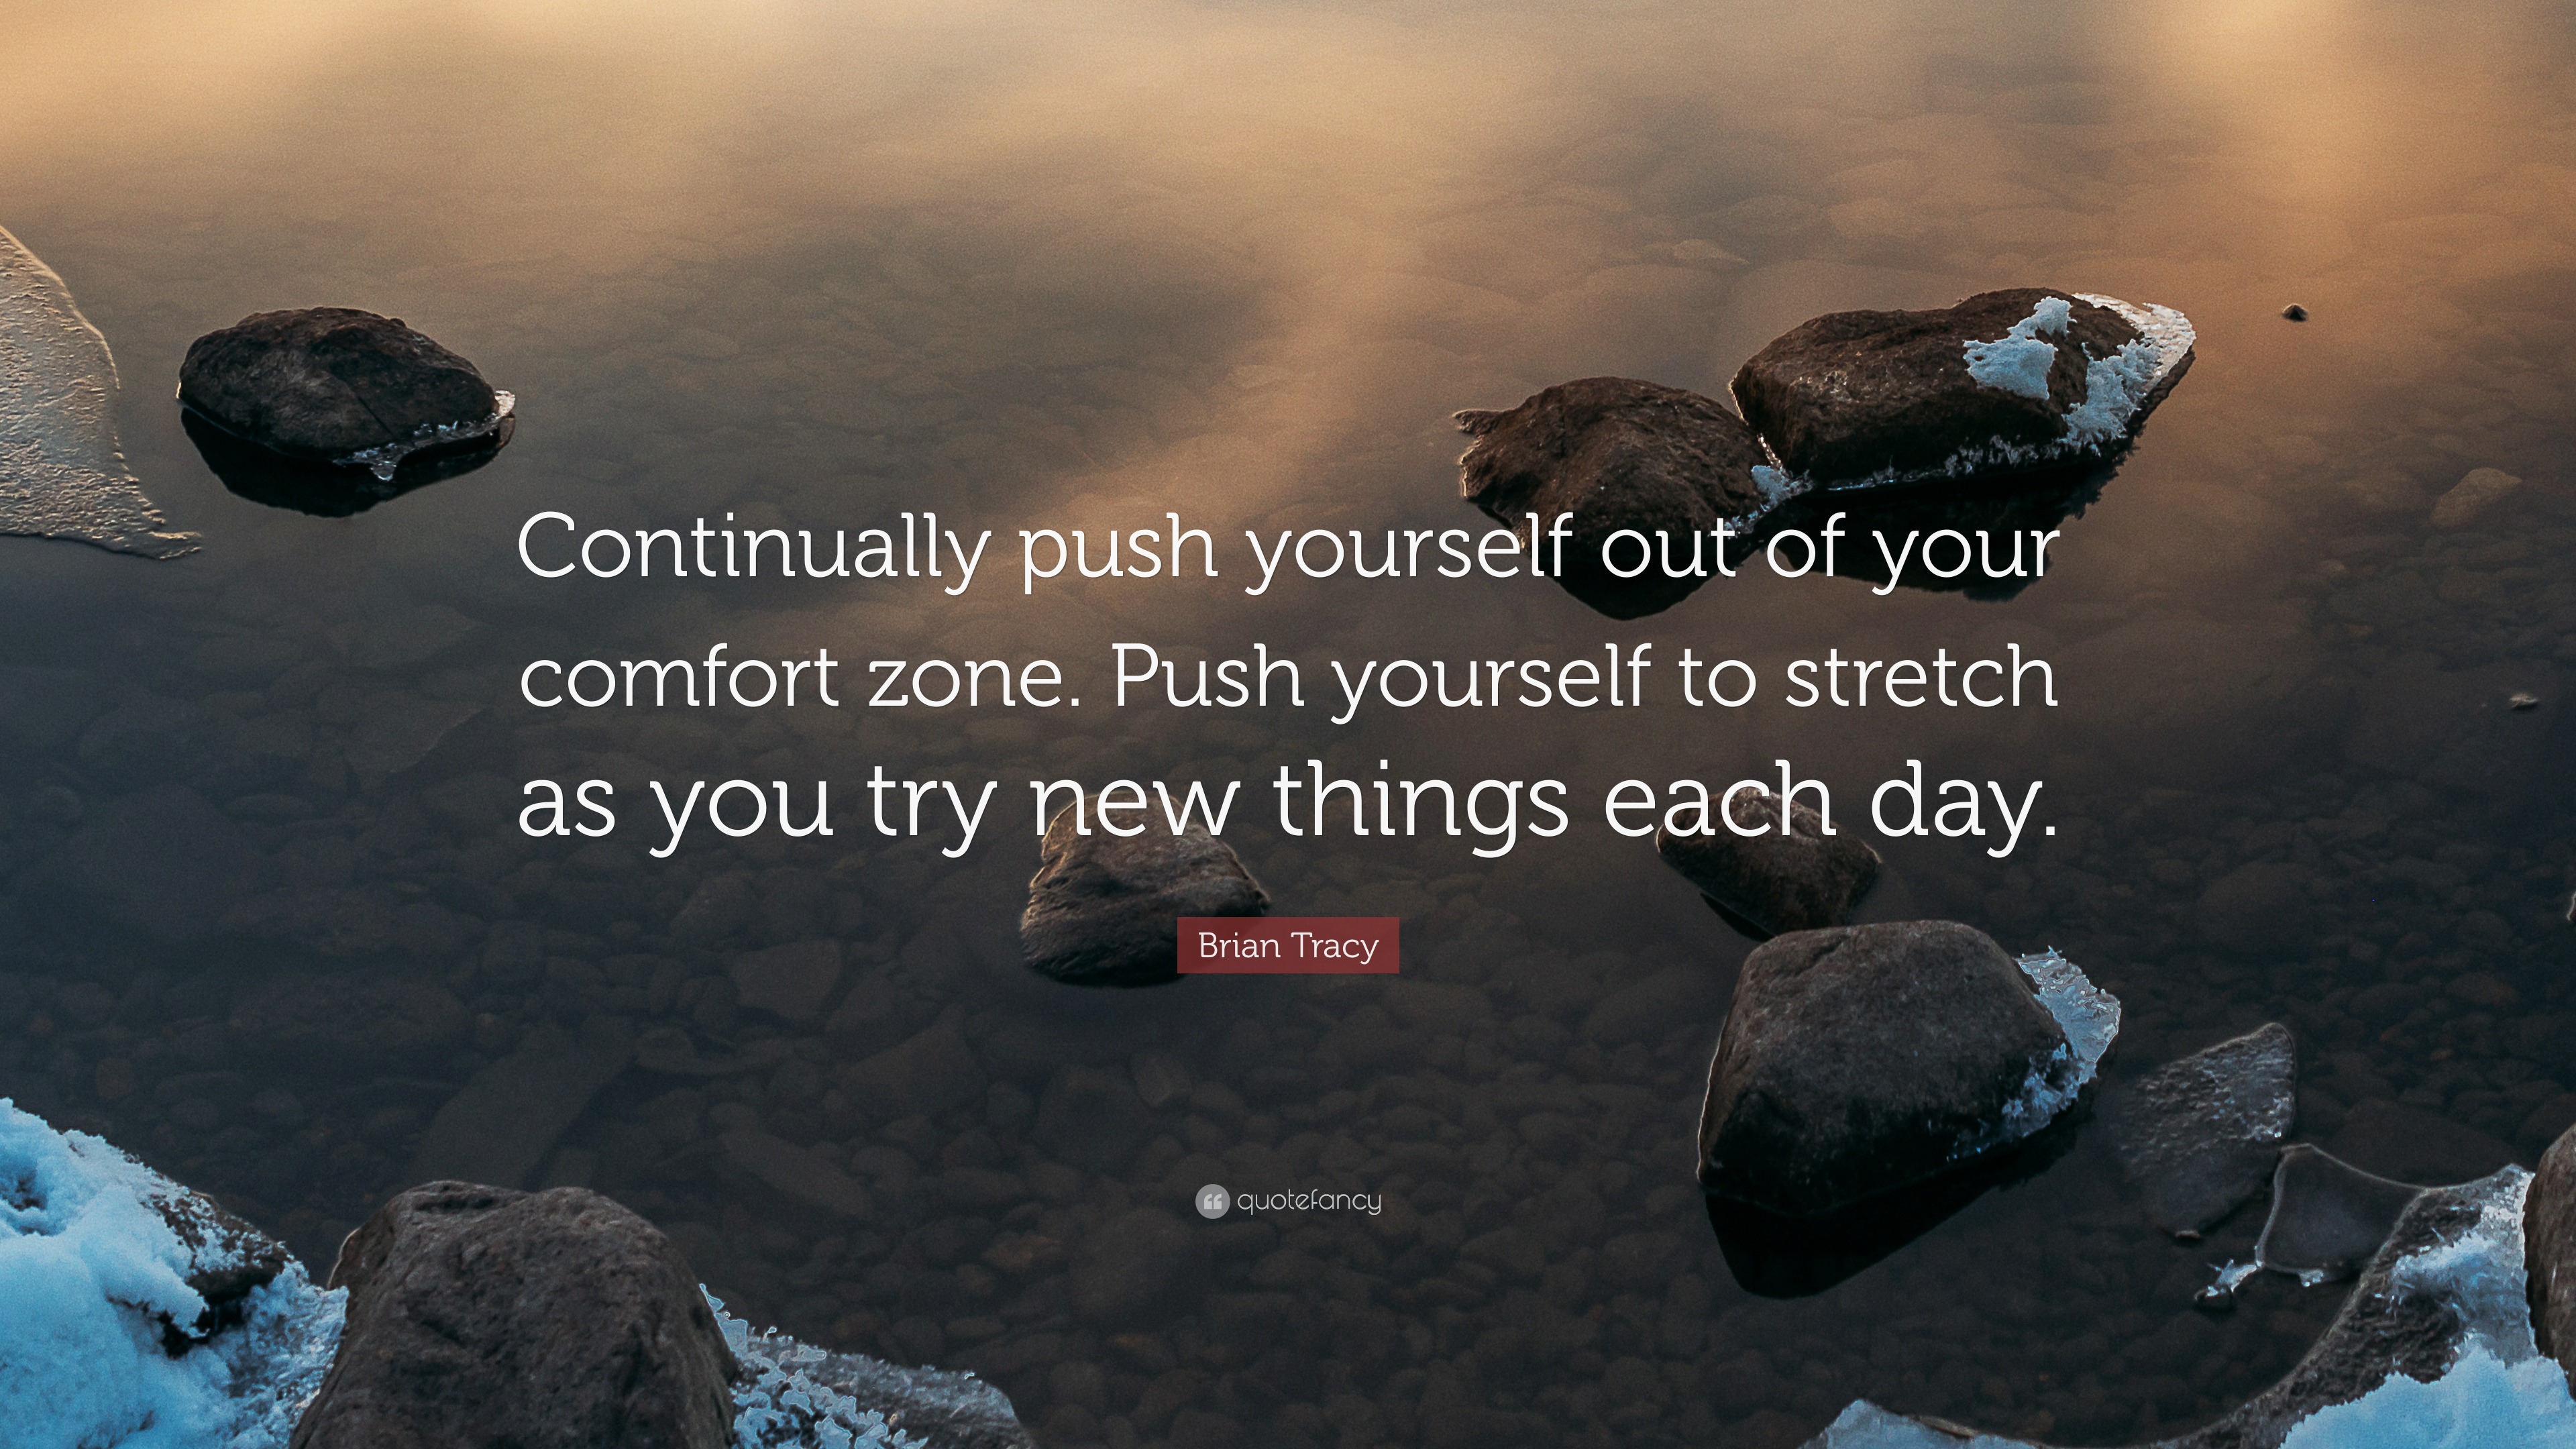 BelievePerform on X: 18 ways to push yourself out your comfort